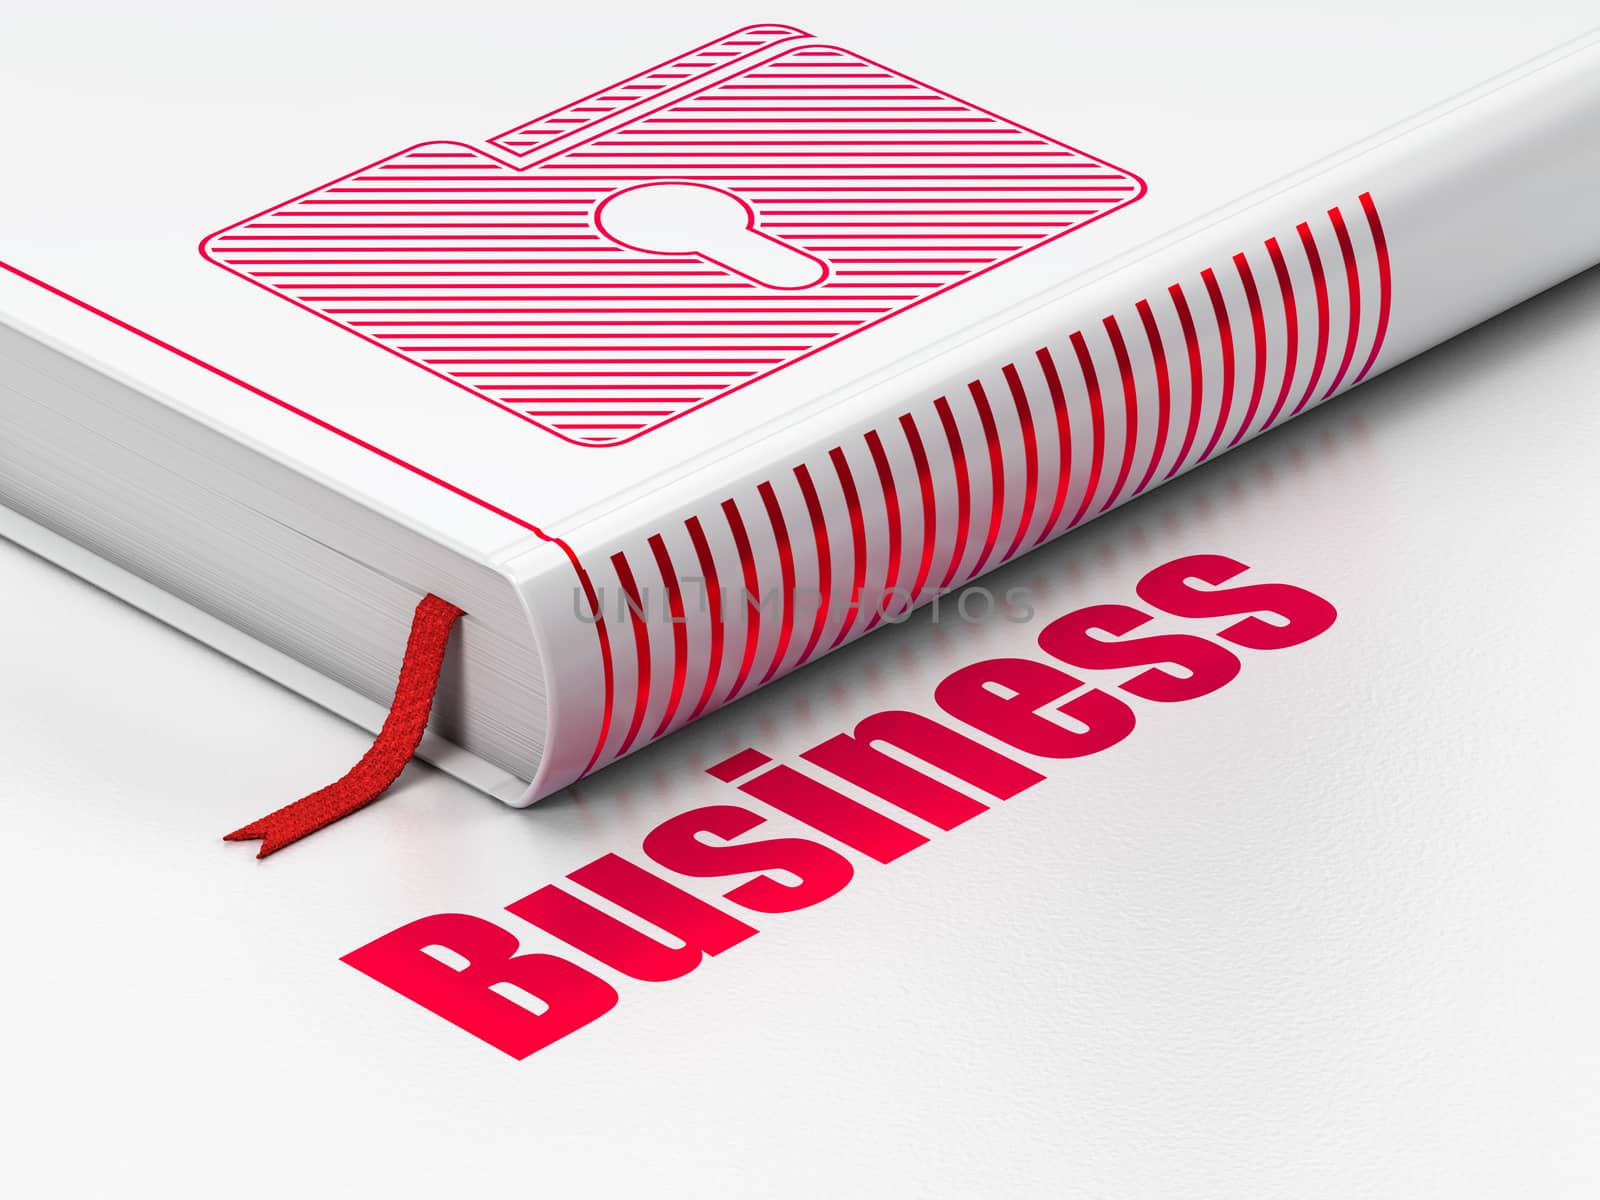 Finance concept: closed book with Red Folder With Keyhole icon and text Business on floor, white background, 3d render